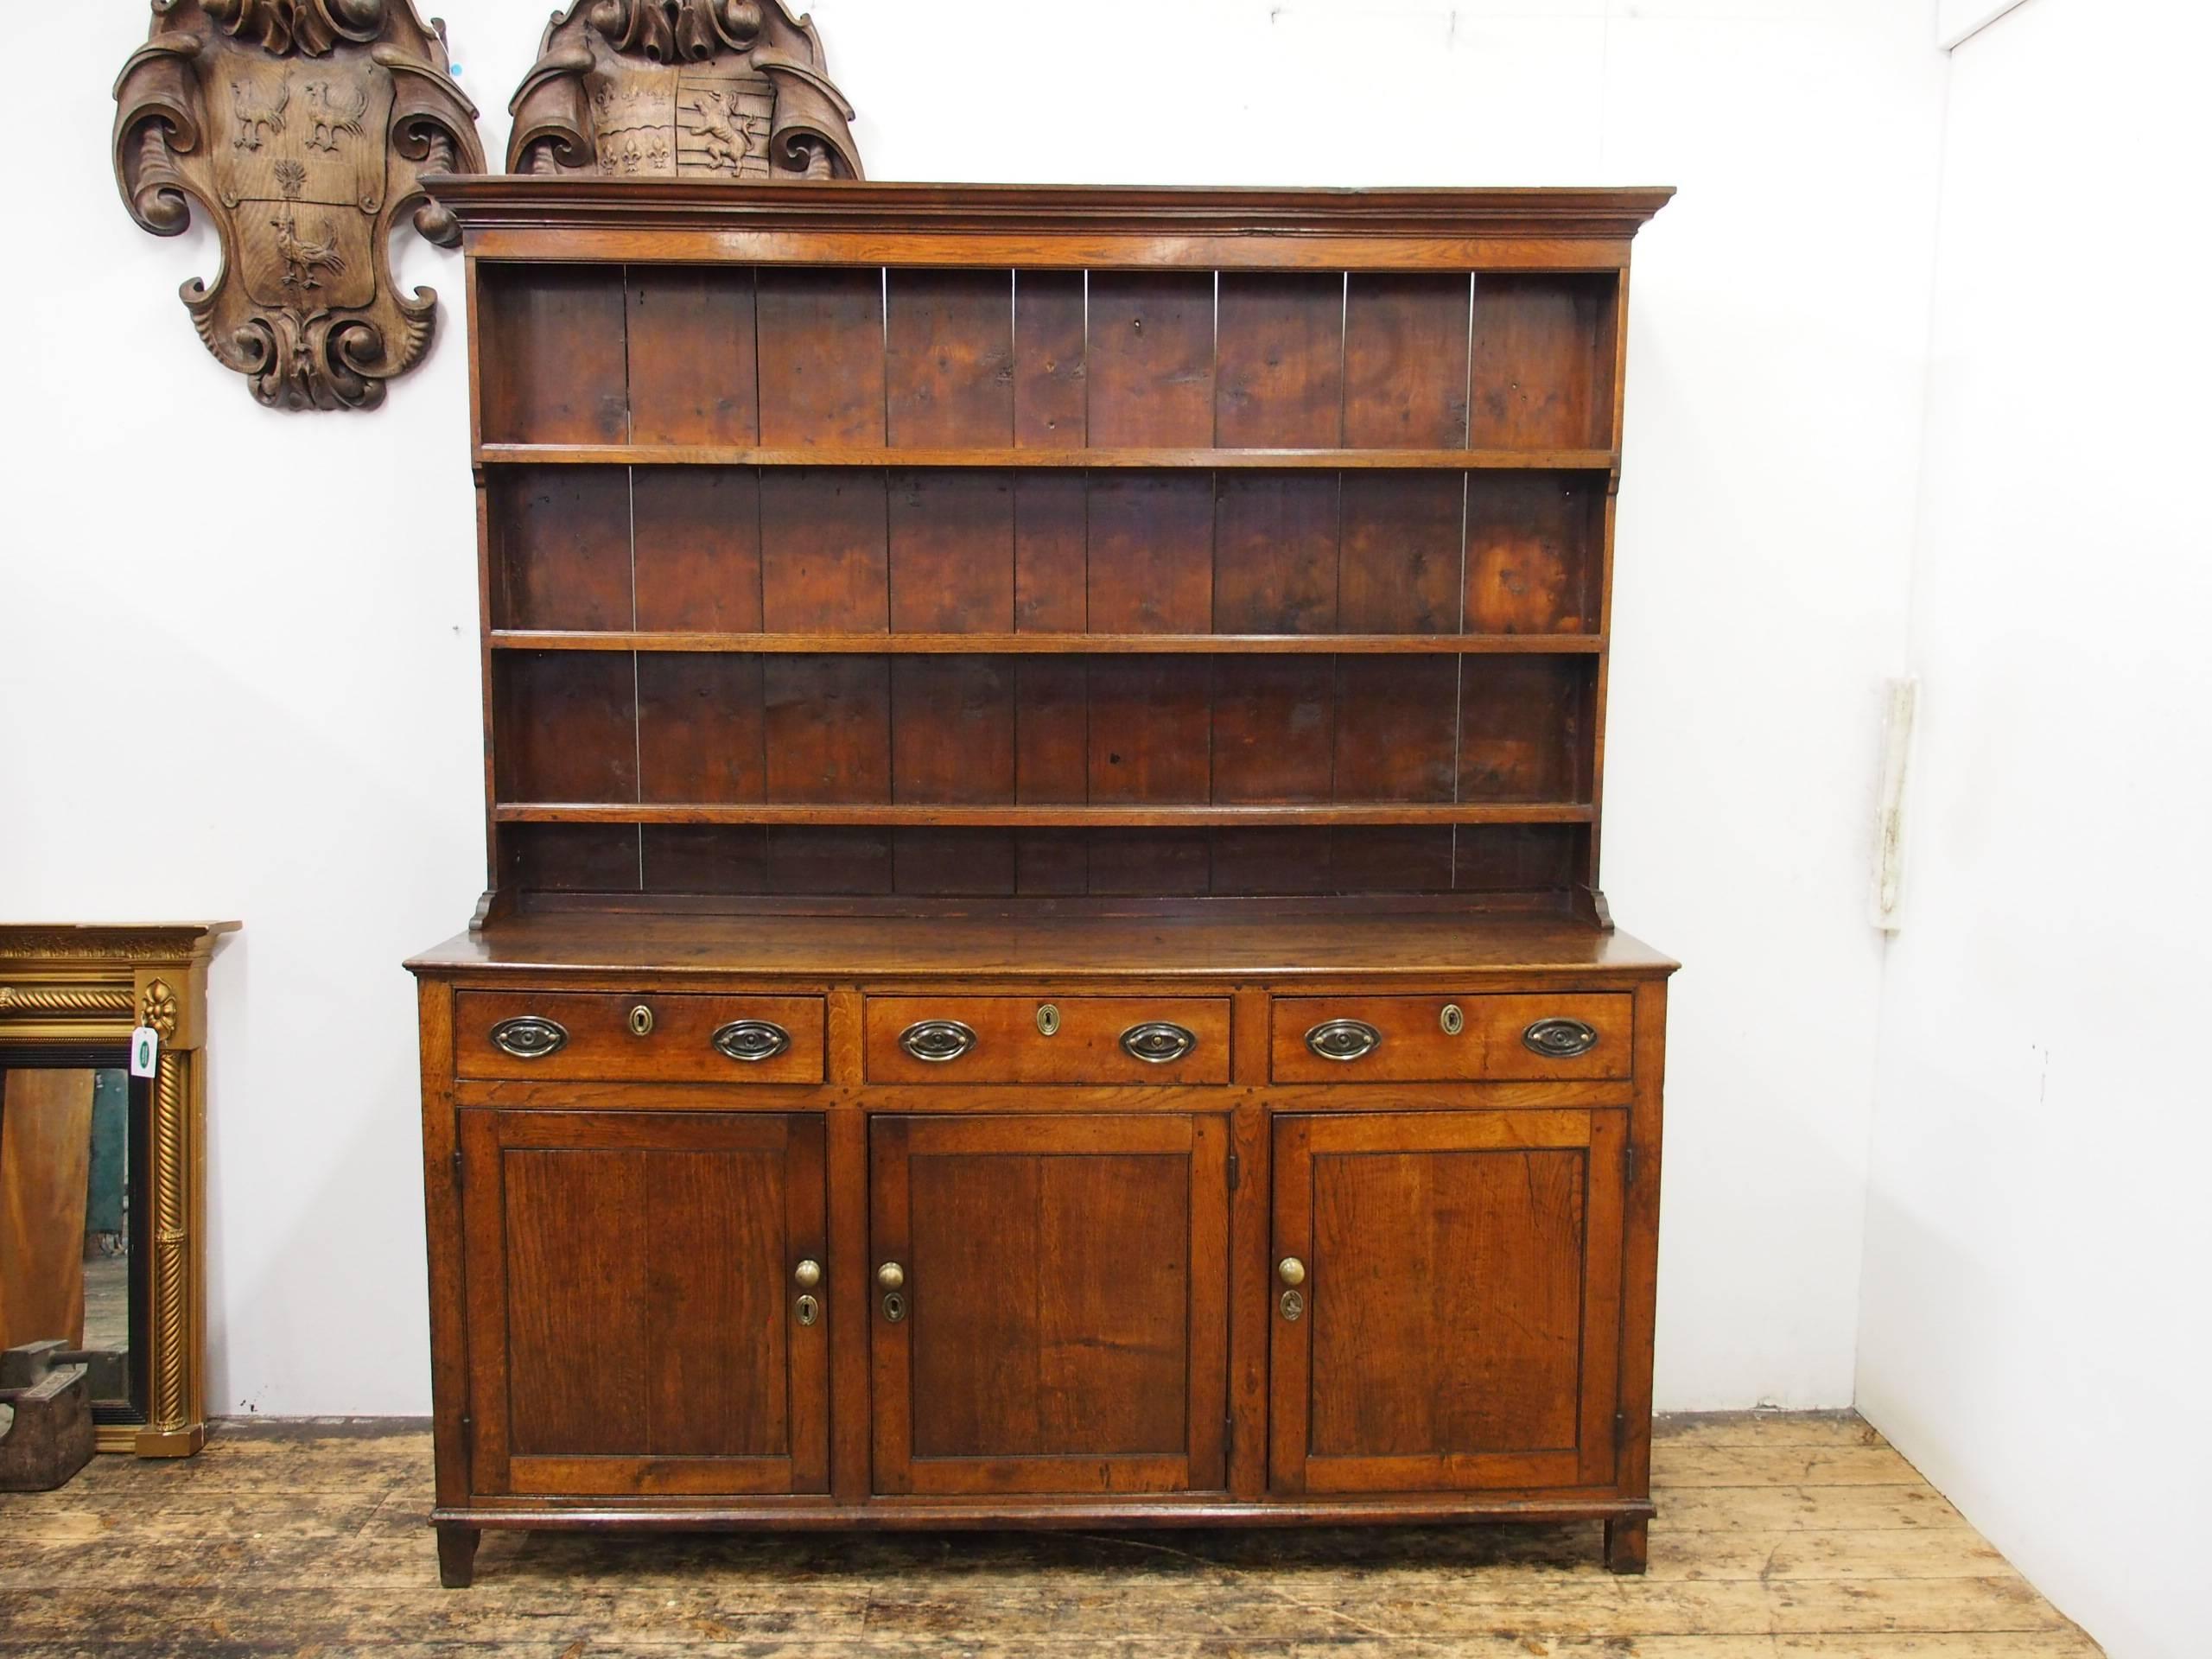 George III Welsh oak dresser, circa 1800. There is an original rack with a protruding moulded cornice and it retains its original vertical backboards with three grooved shelves. The base has a three plank top which is over three frieze drawers with